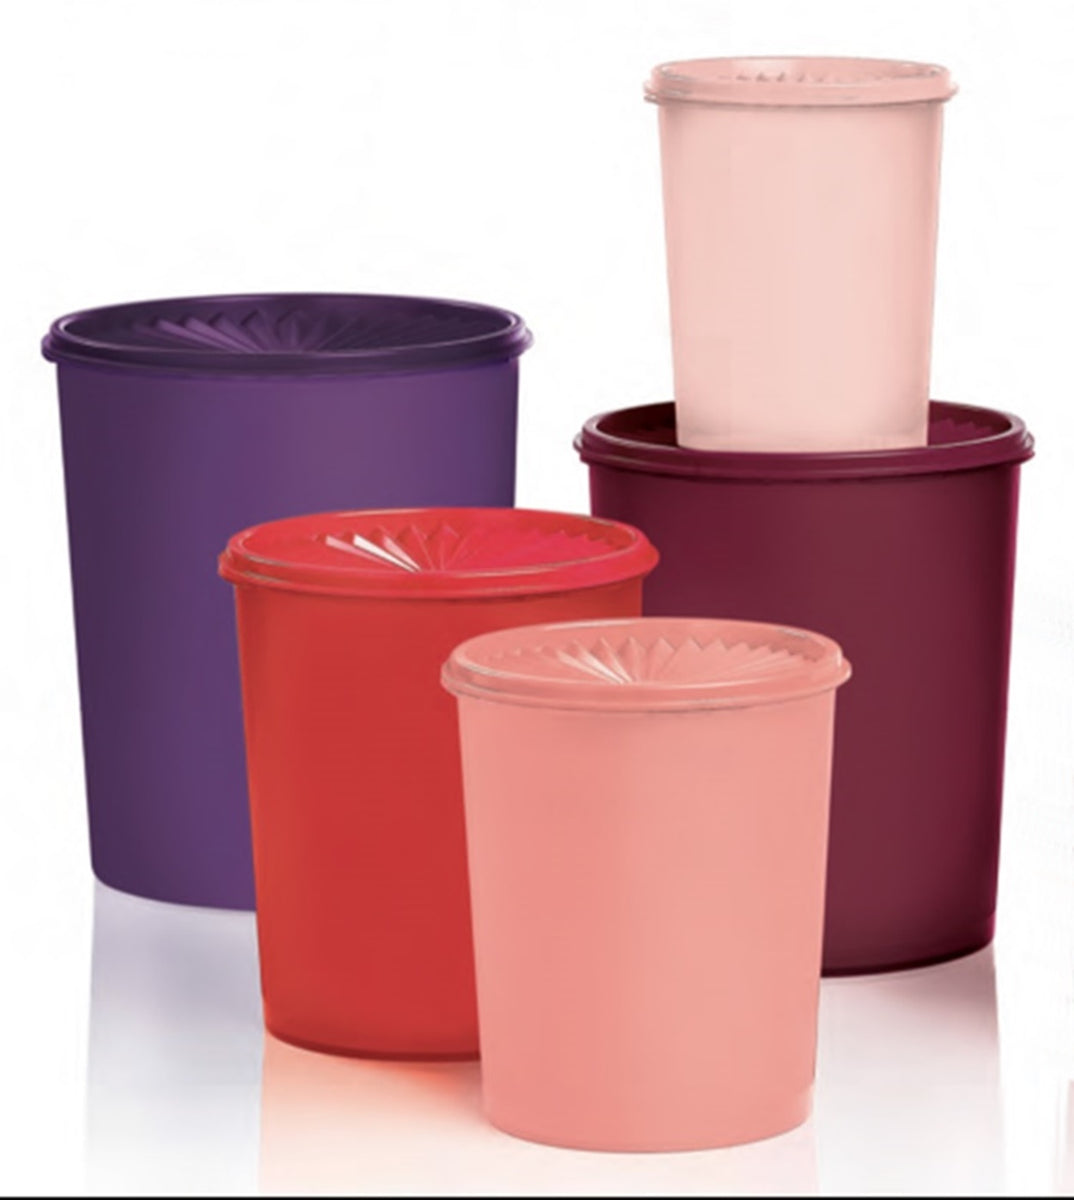 Tupperware Servalier Bowls Set of 5 Shades of Pink Stacking Brand New